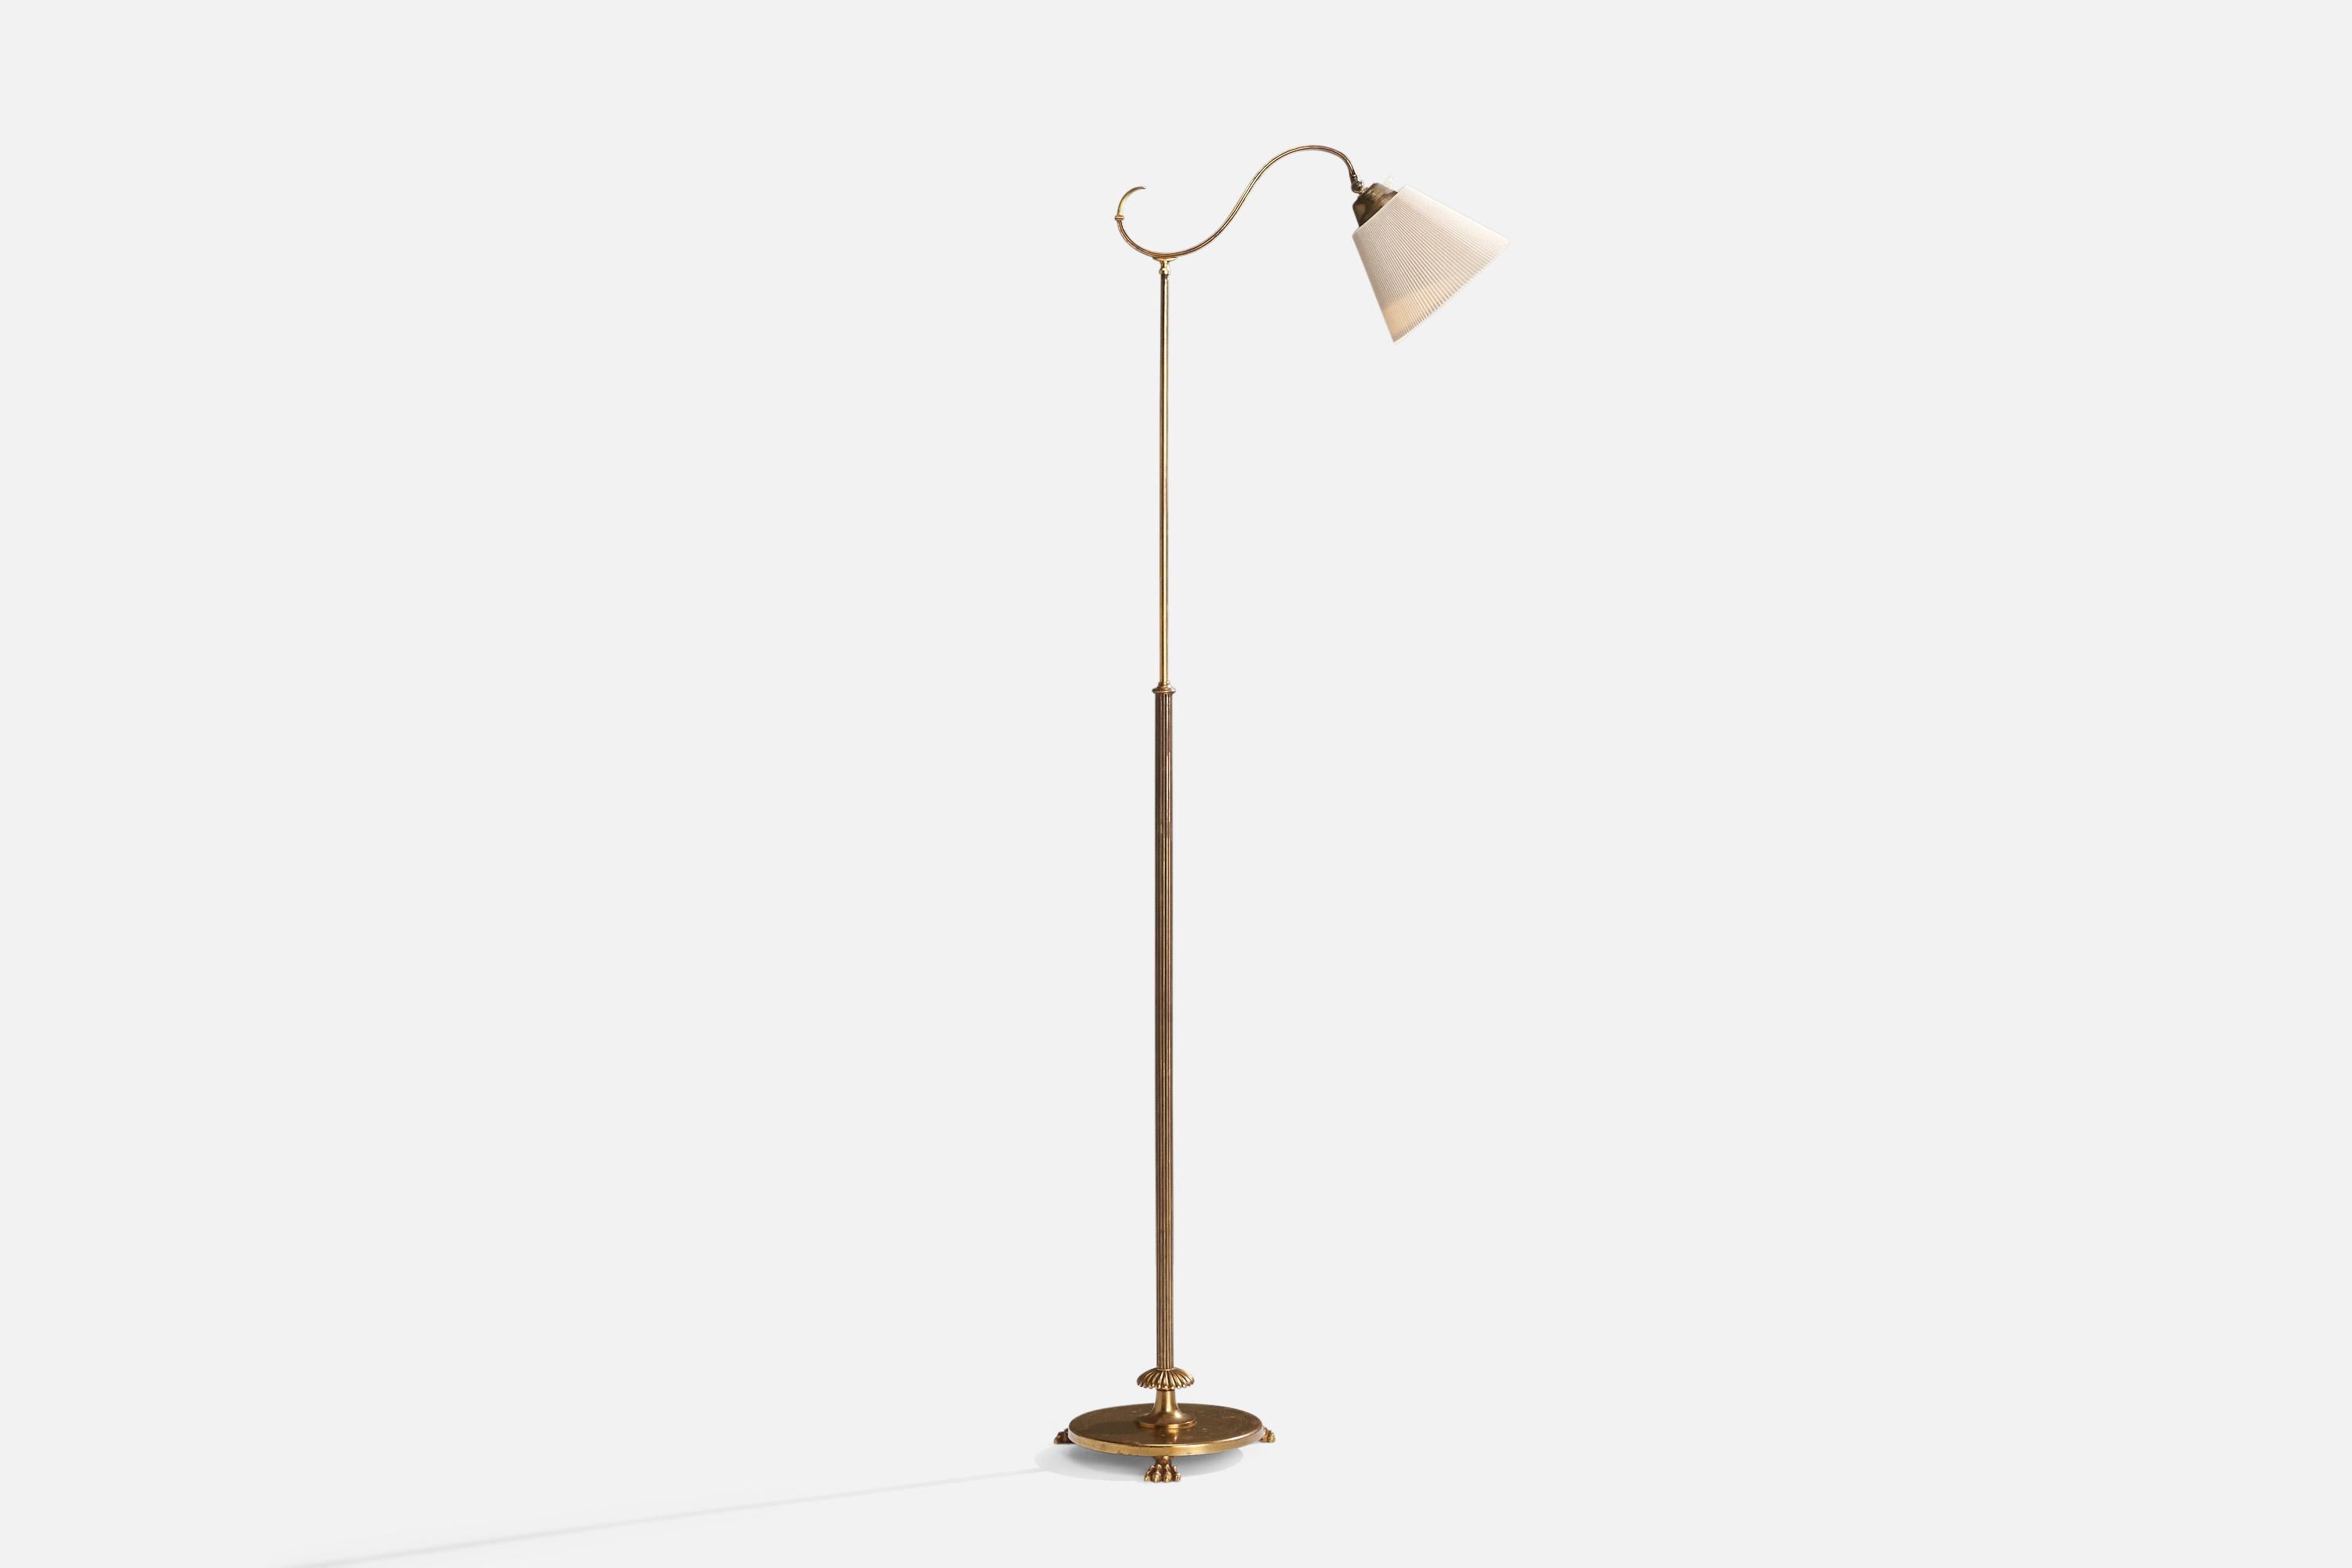 An adjustable brass and off-white fabric floor lamp designed and produced in Sweden, c. 1930s.

Dimensions variable 
Overall Dimensions (inches): 58.5” H x 8.75” W x 25” D
Stated dimensions include shade.
Bulb Specifications: E-26 Bulb
Number of